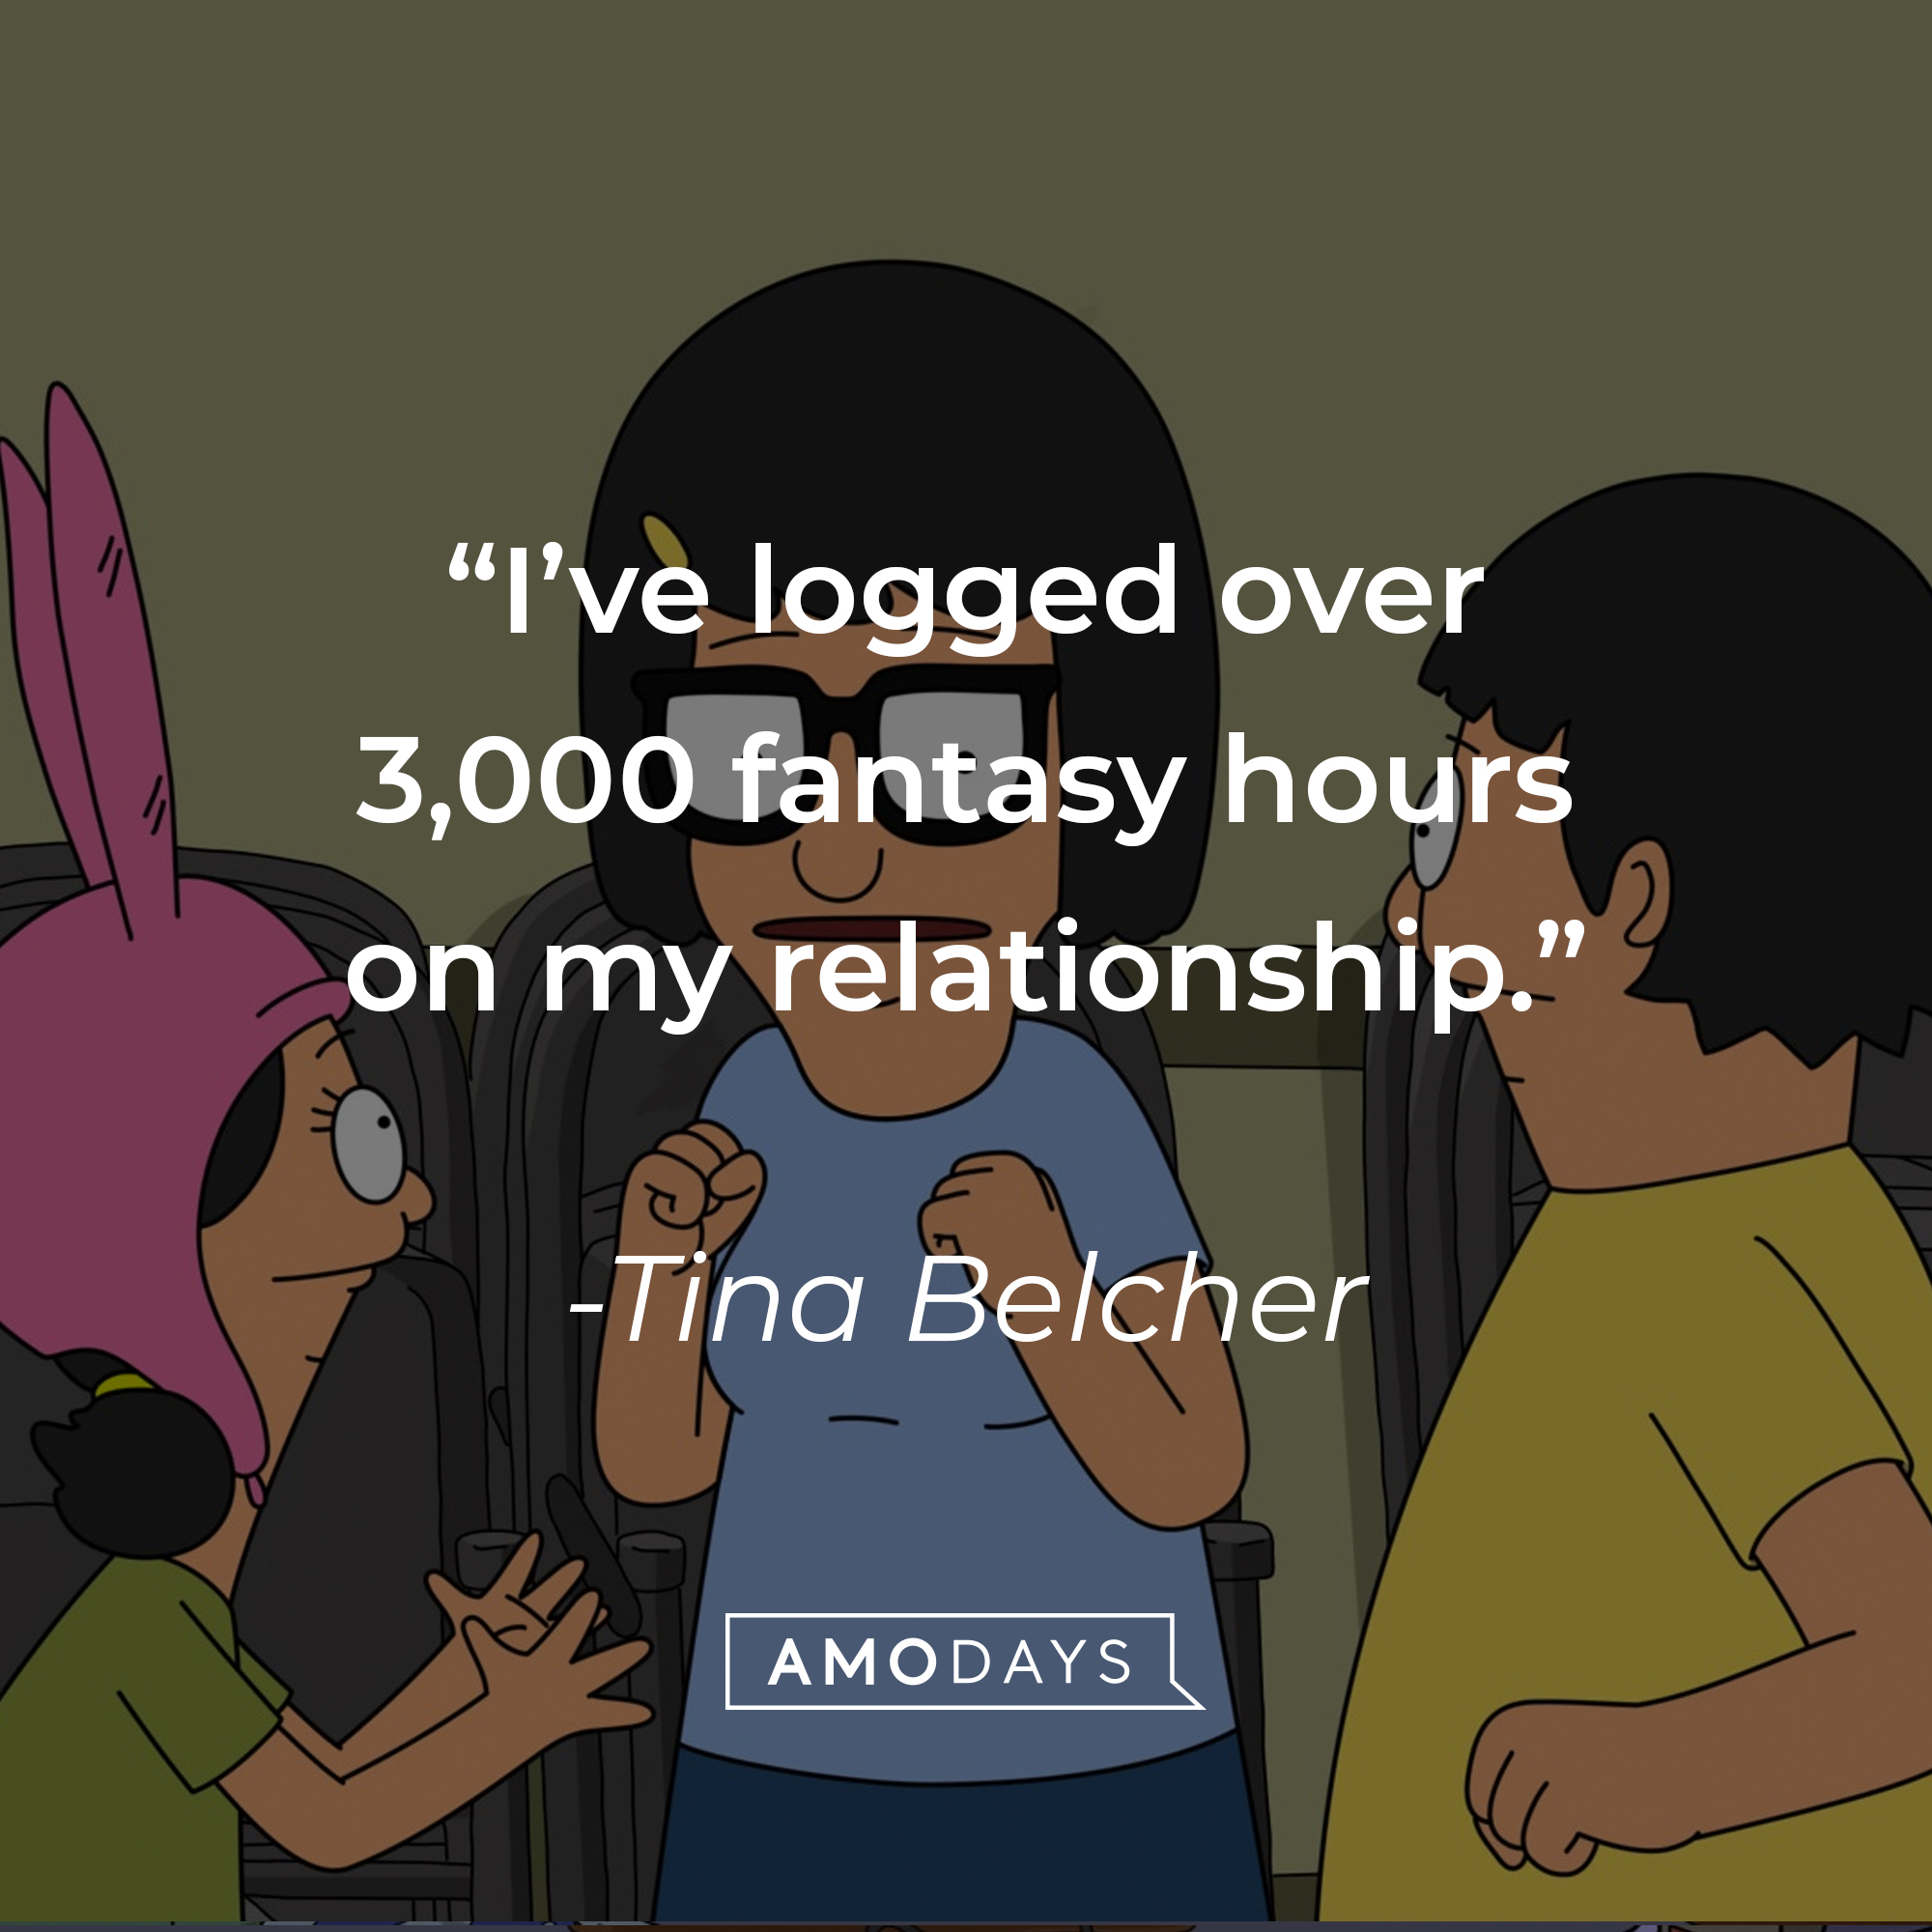 An Image of Tina Belcher and other characters from “Bob’s Burgers’s with her quote: “I’ve logged over 3,000 fantasy hours on my relationship.” | Source: Facebook.com/BobsBurgers